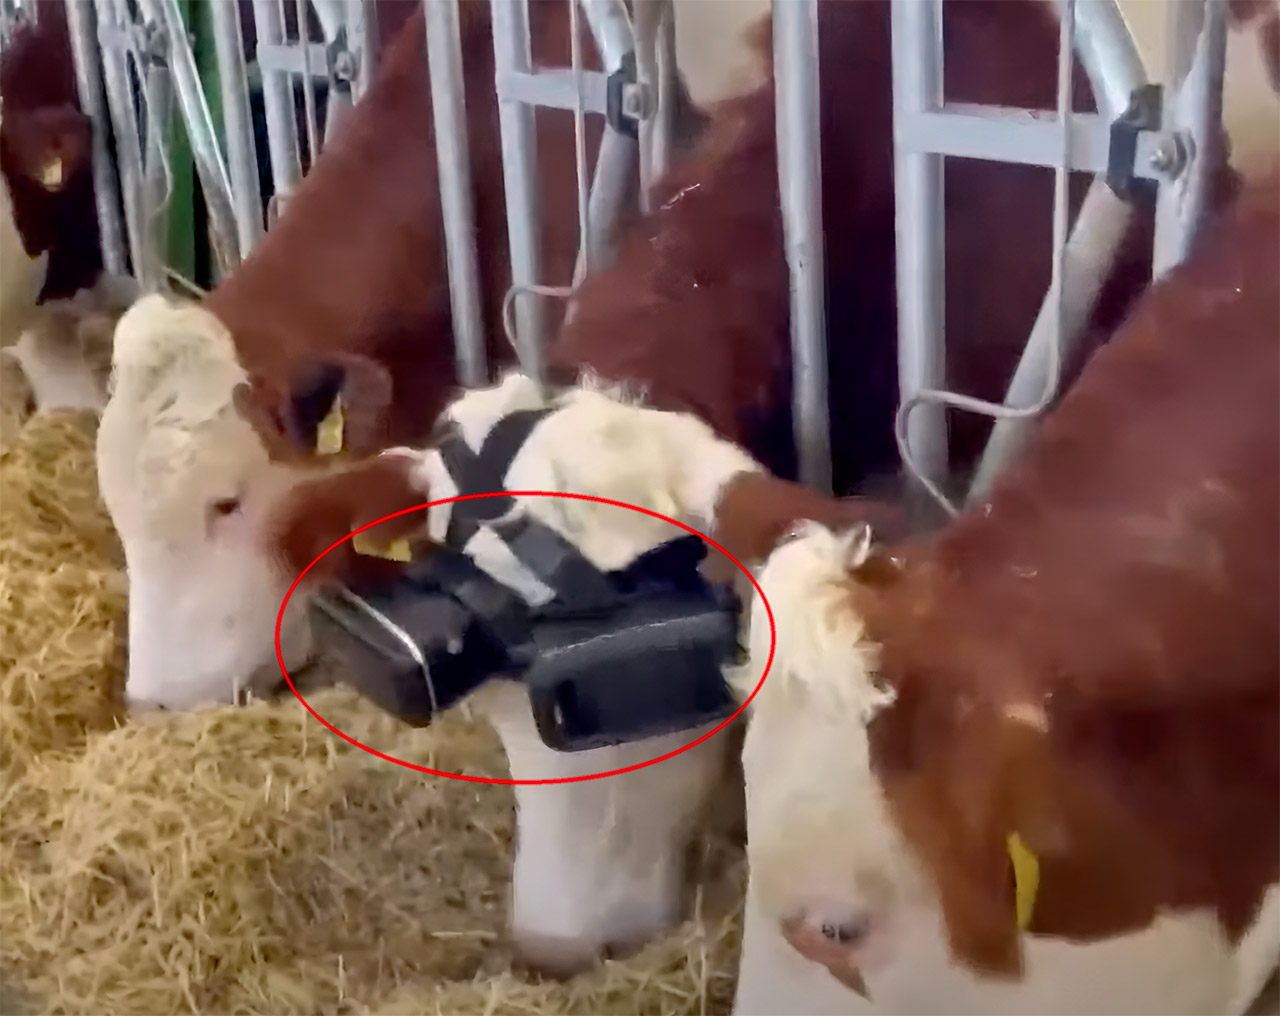 Farmer in Turkey Uses Reality Headsets to Trick Cows Into Producing More Milk by Simulating Green Pastures - TechEBlog